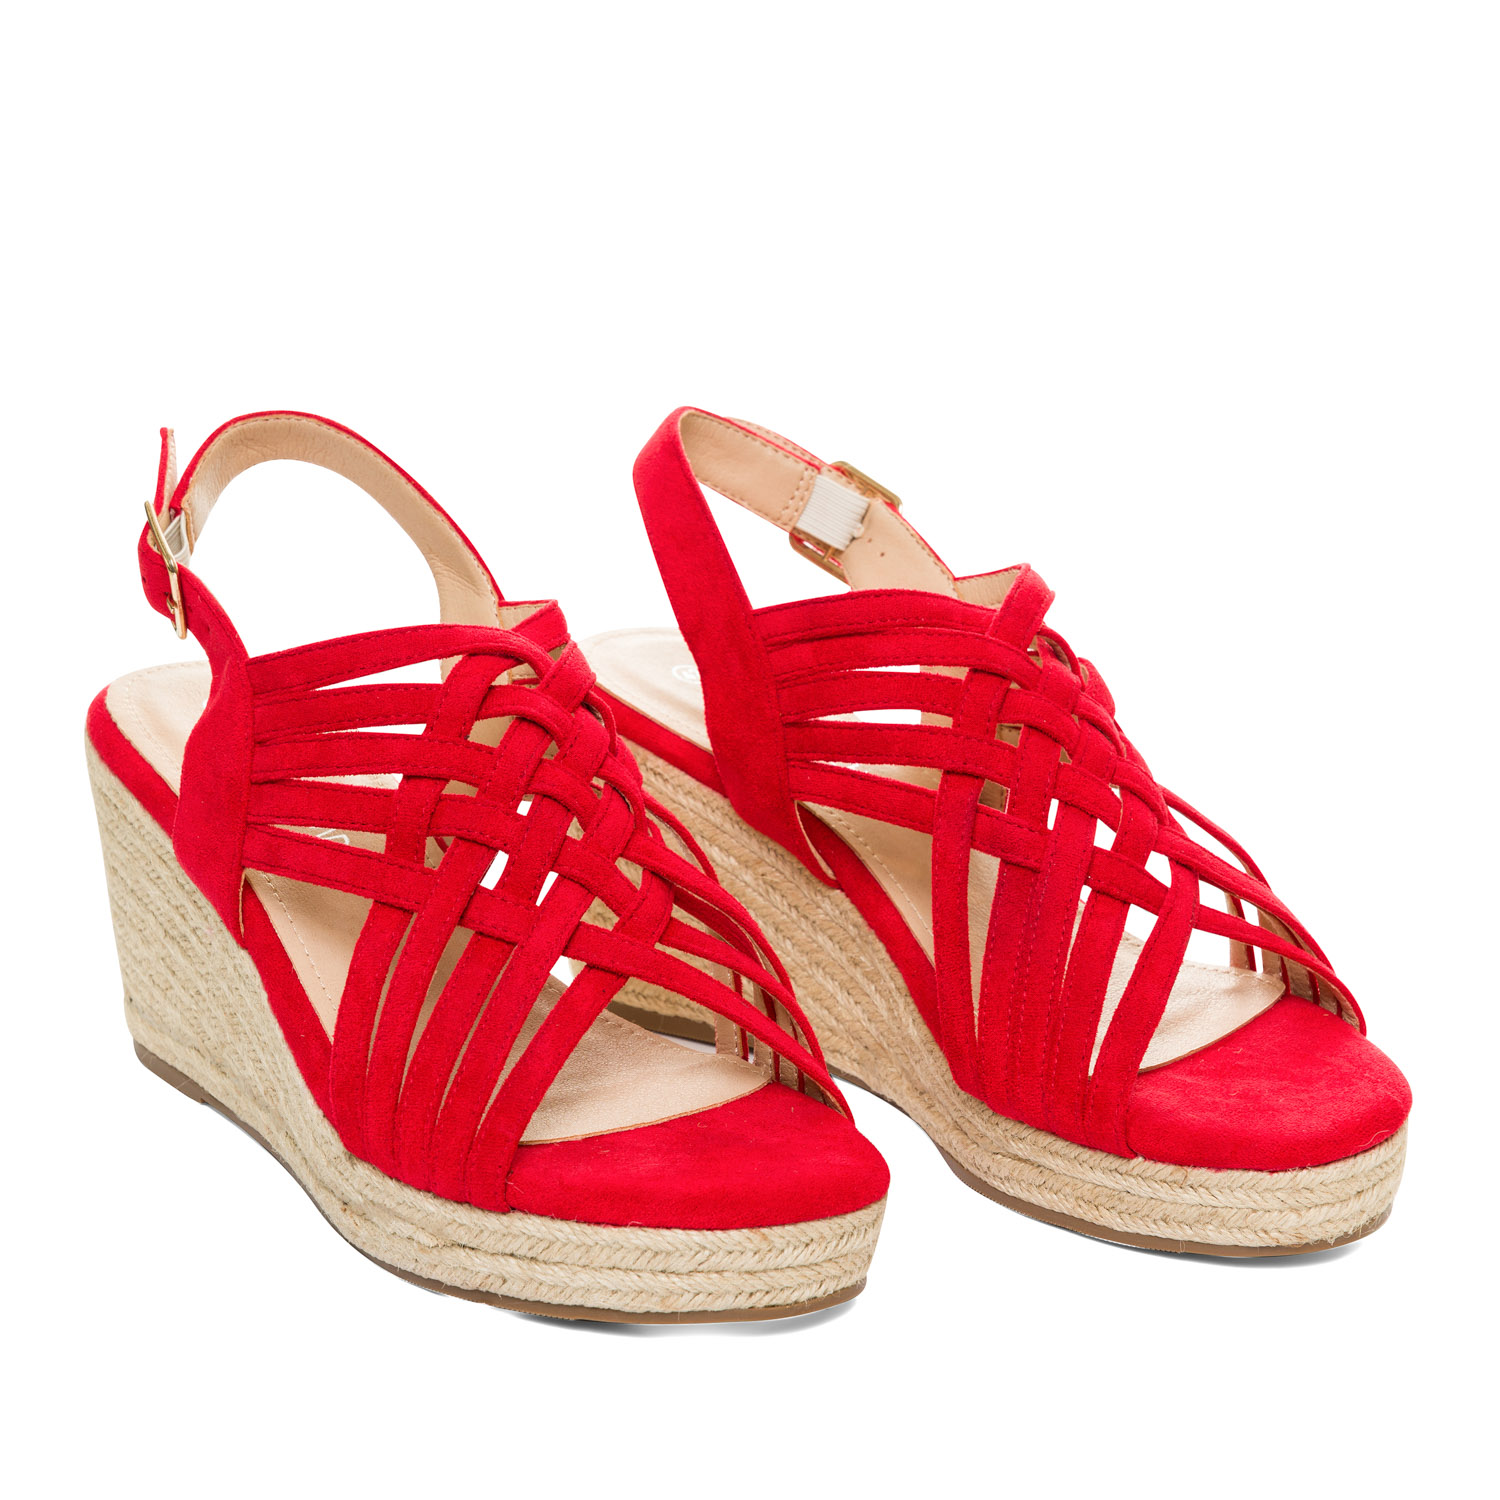 Red faux suede espadrilles with jute wedge - Women, Sandals, Women ...